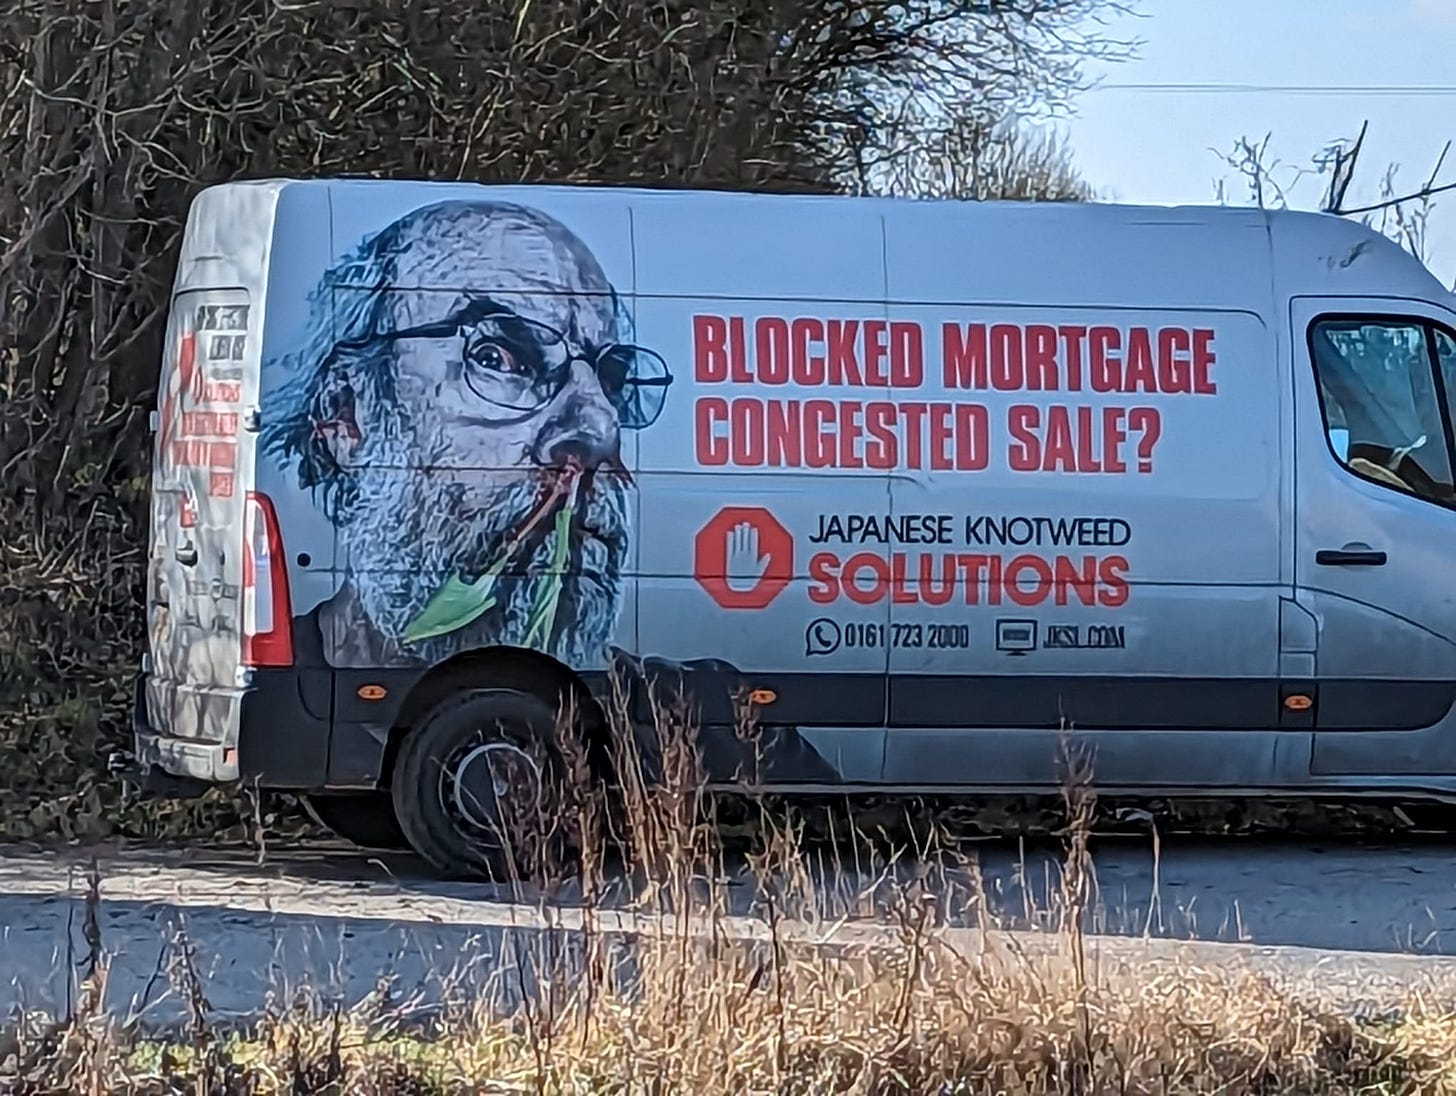 A van with a picture of a man sprouting knotweed from his nostrils and the line "BLOCKED MORTGAGE - CONGESTED SALE?"